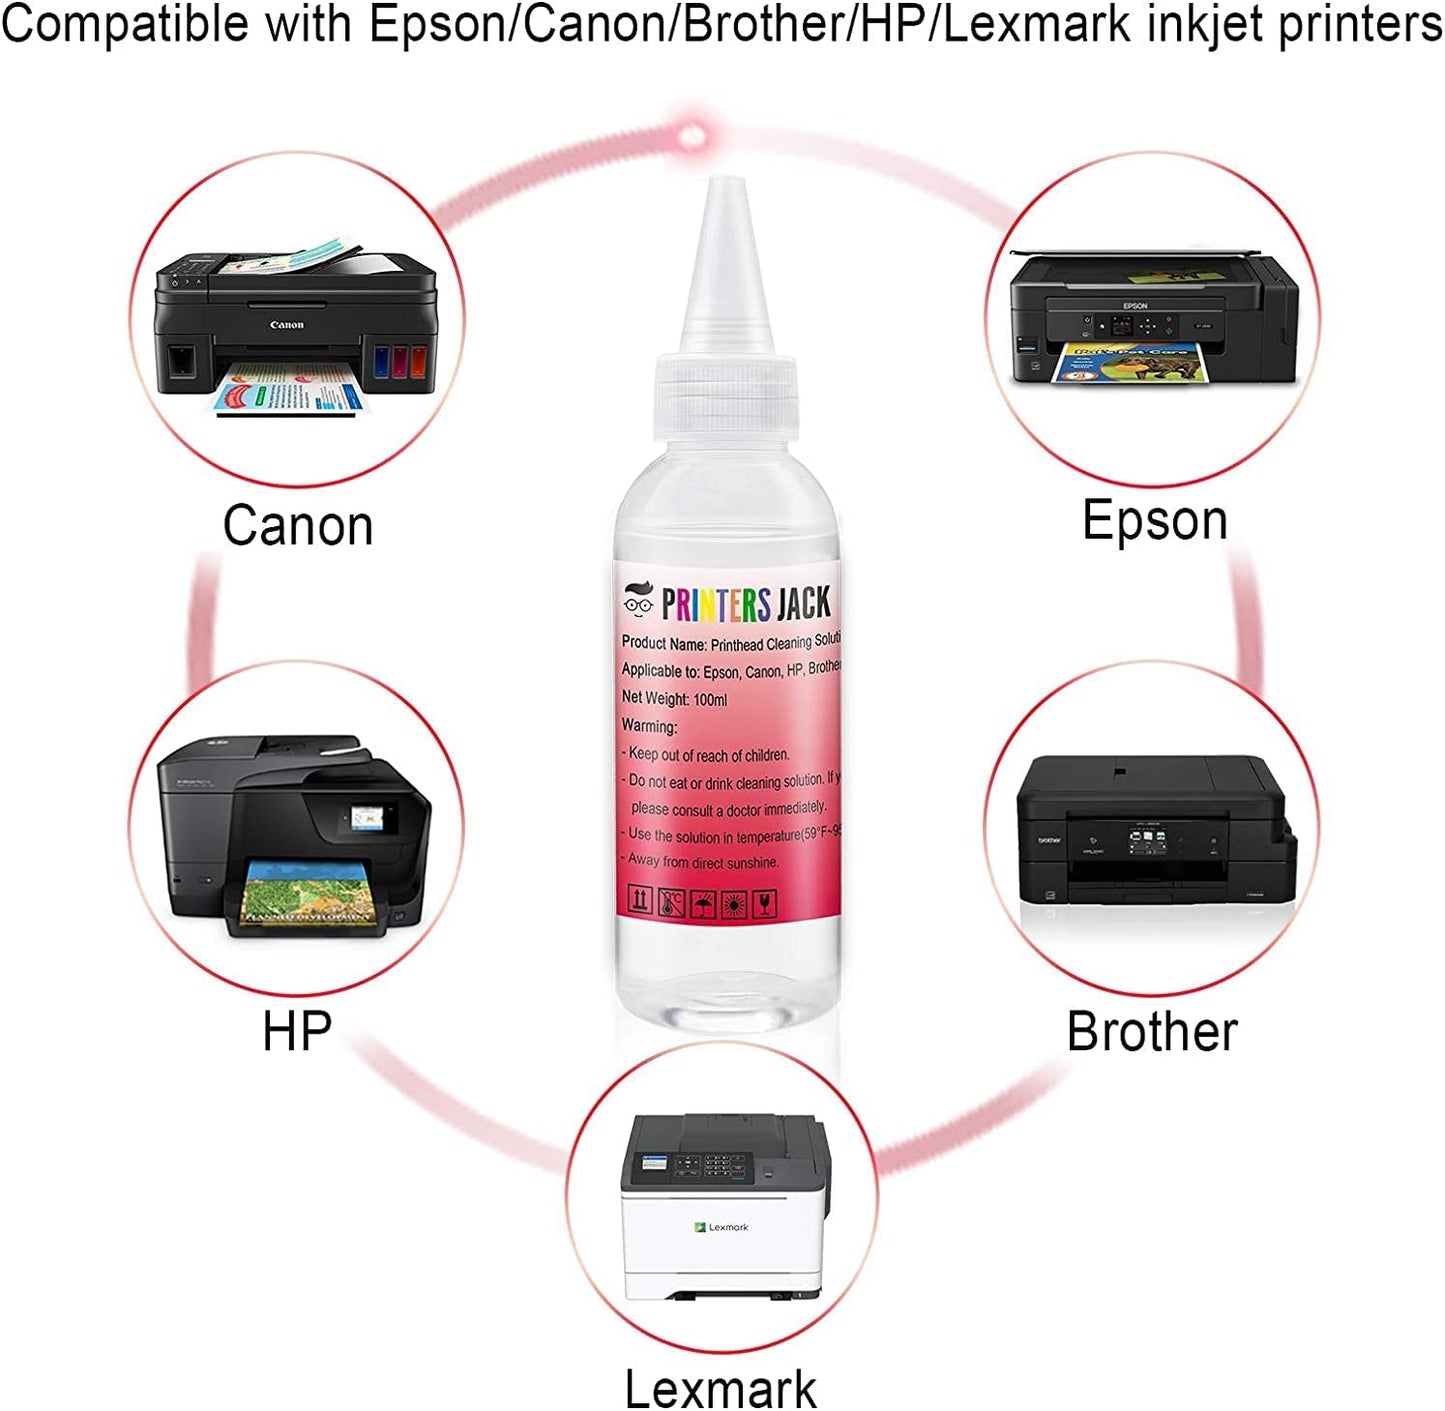 Printers Jack Printhead Cleaning Kit Nozzle Solution for Brother HP Officejet 8610 8600 8620 6600 5520 6500 6700 Canon Pro 10 Pro 100 MX922 Brother MG7120 MG6320 Inkjet Printers